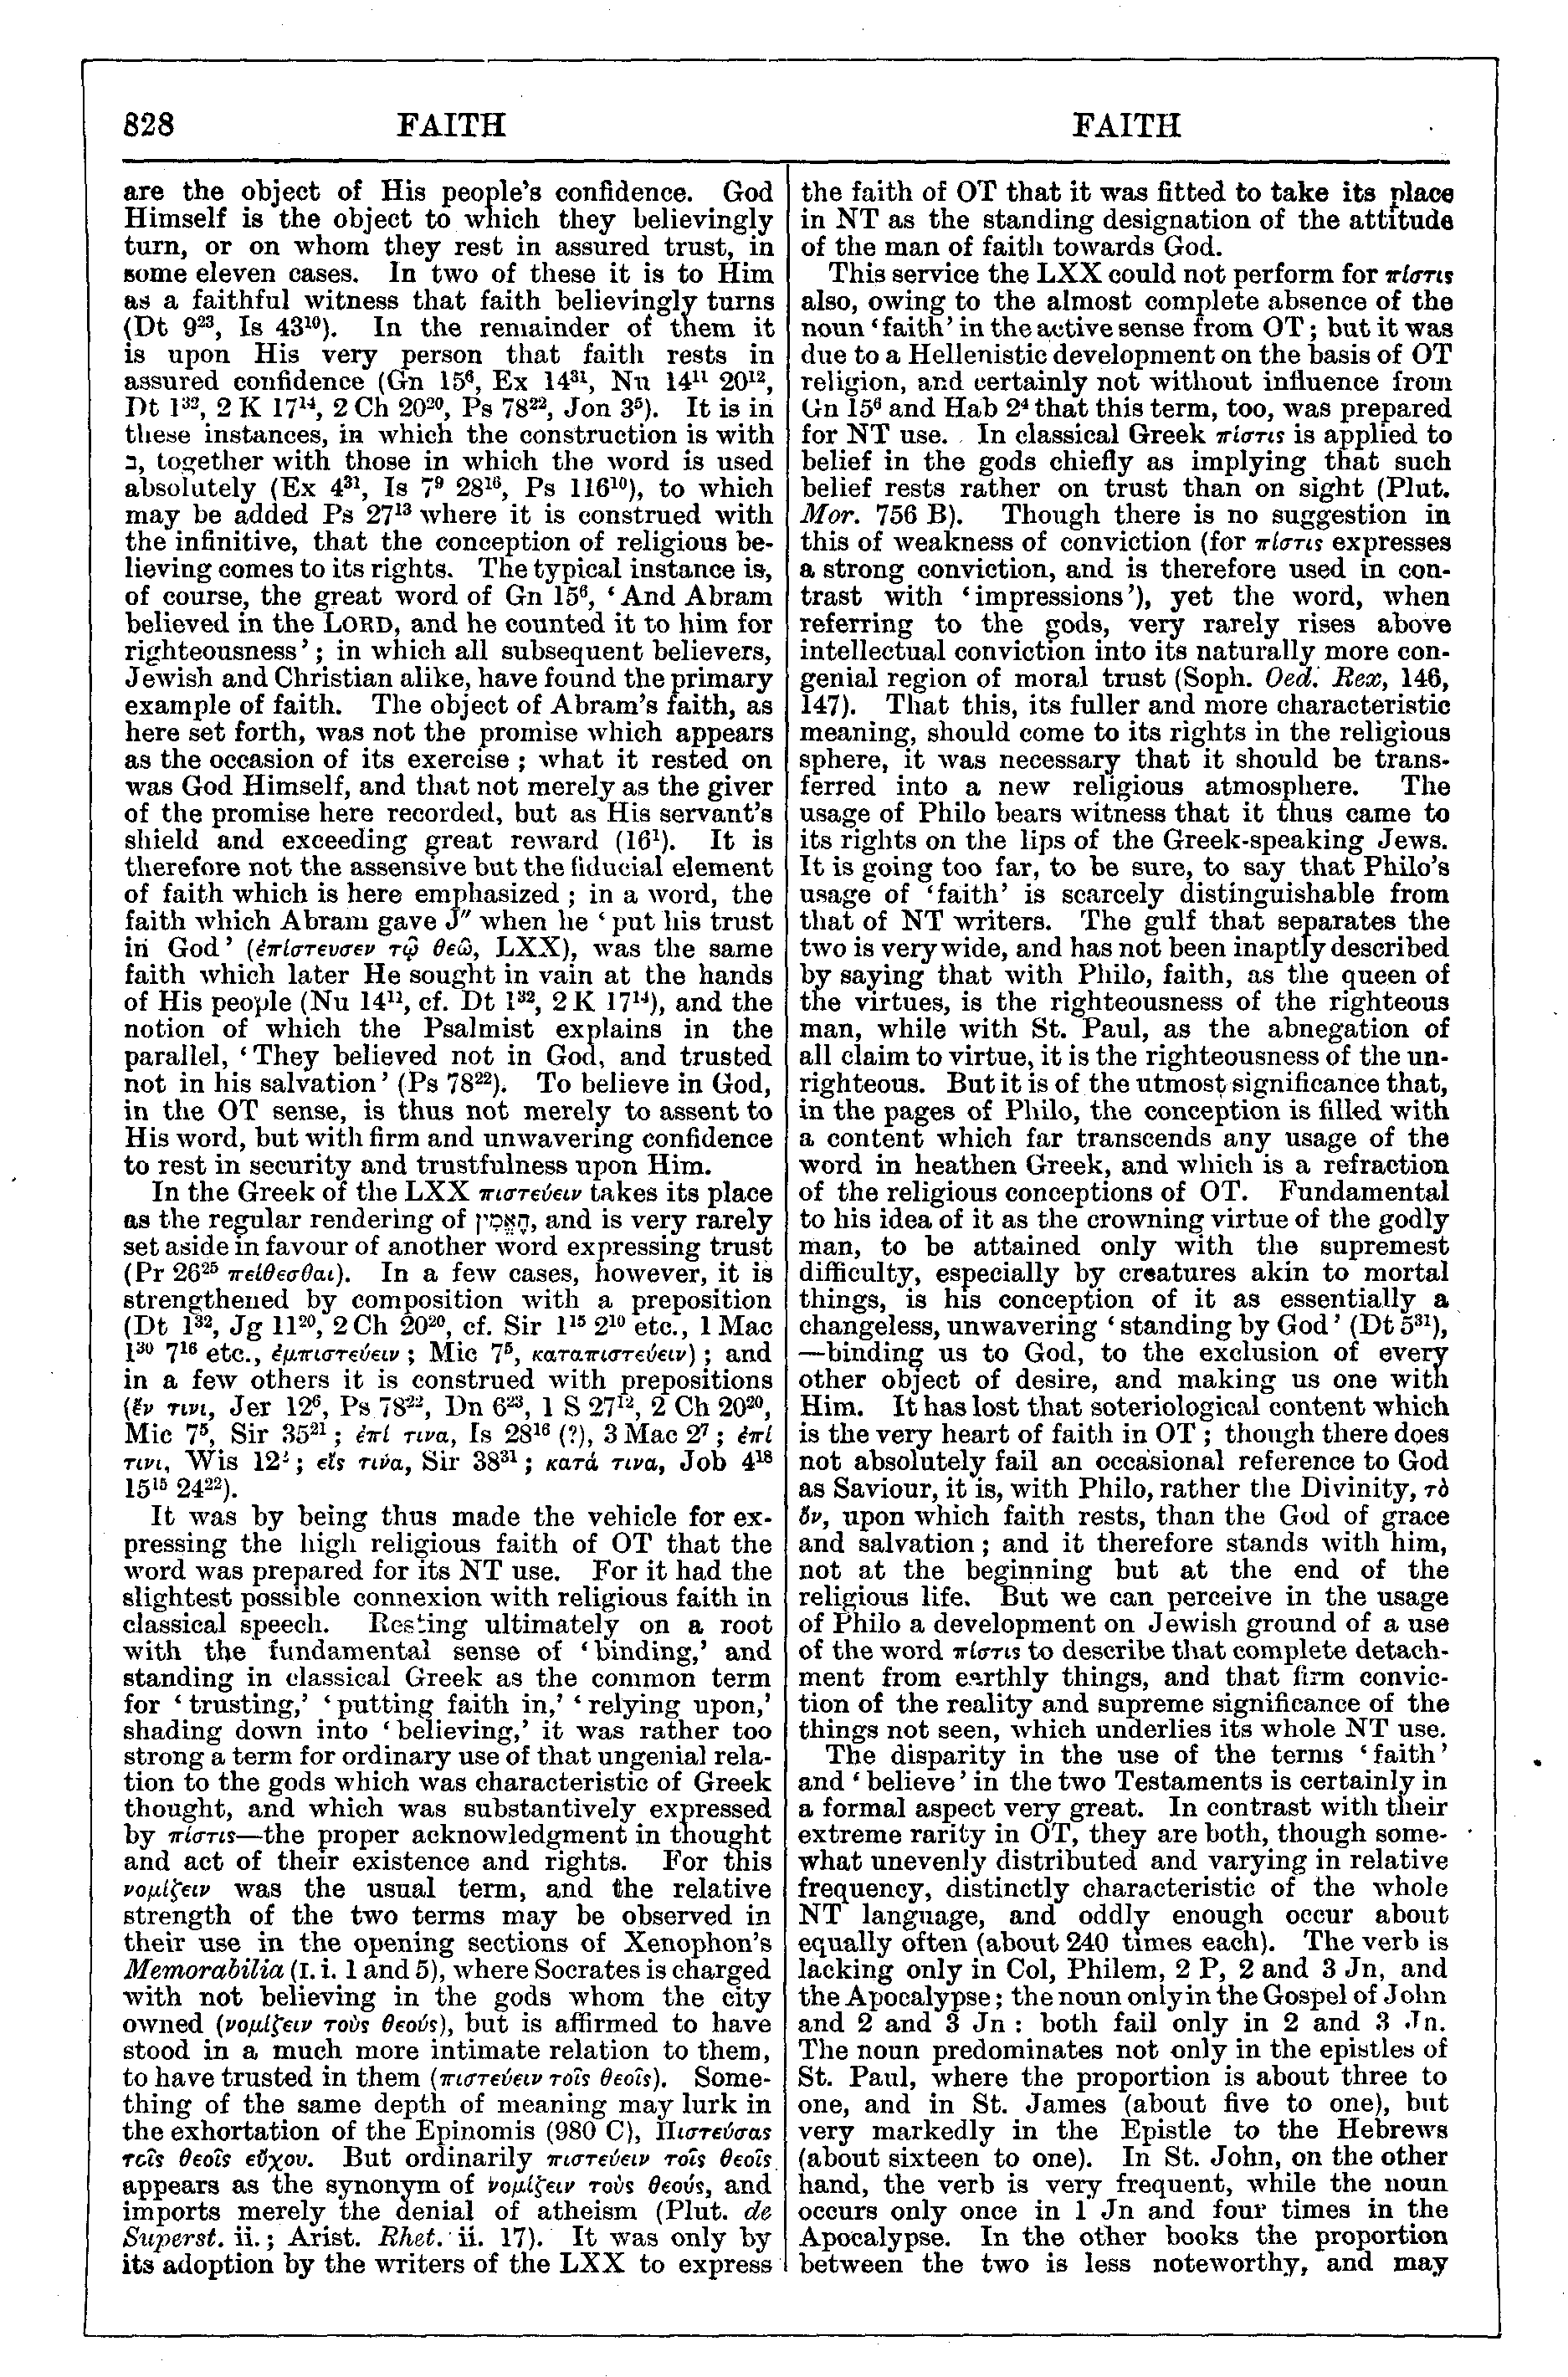 Image of page 828